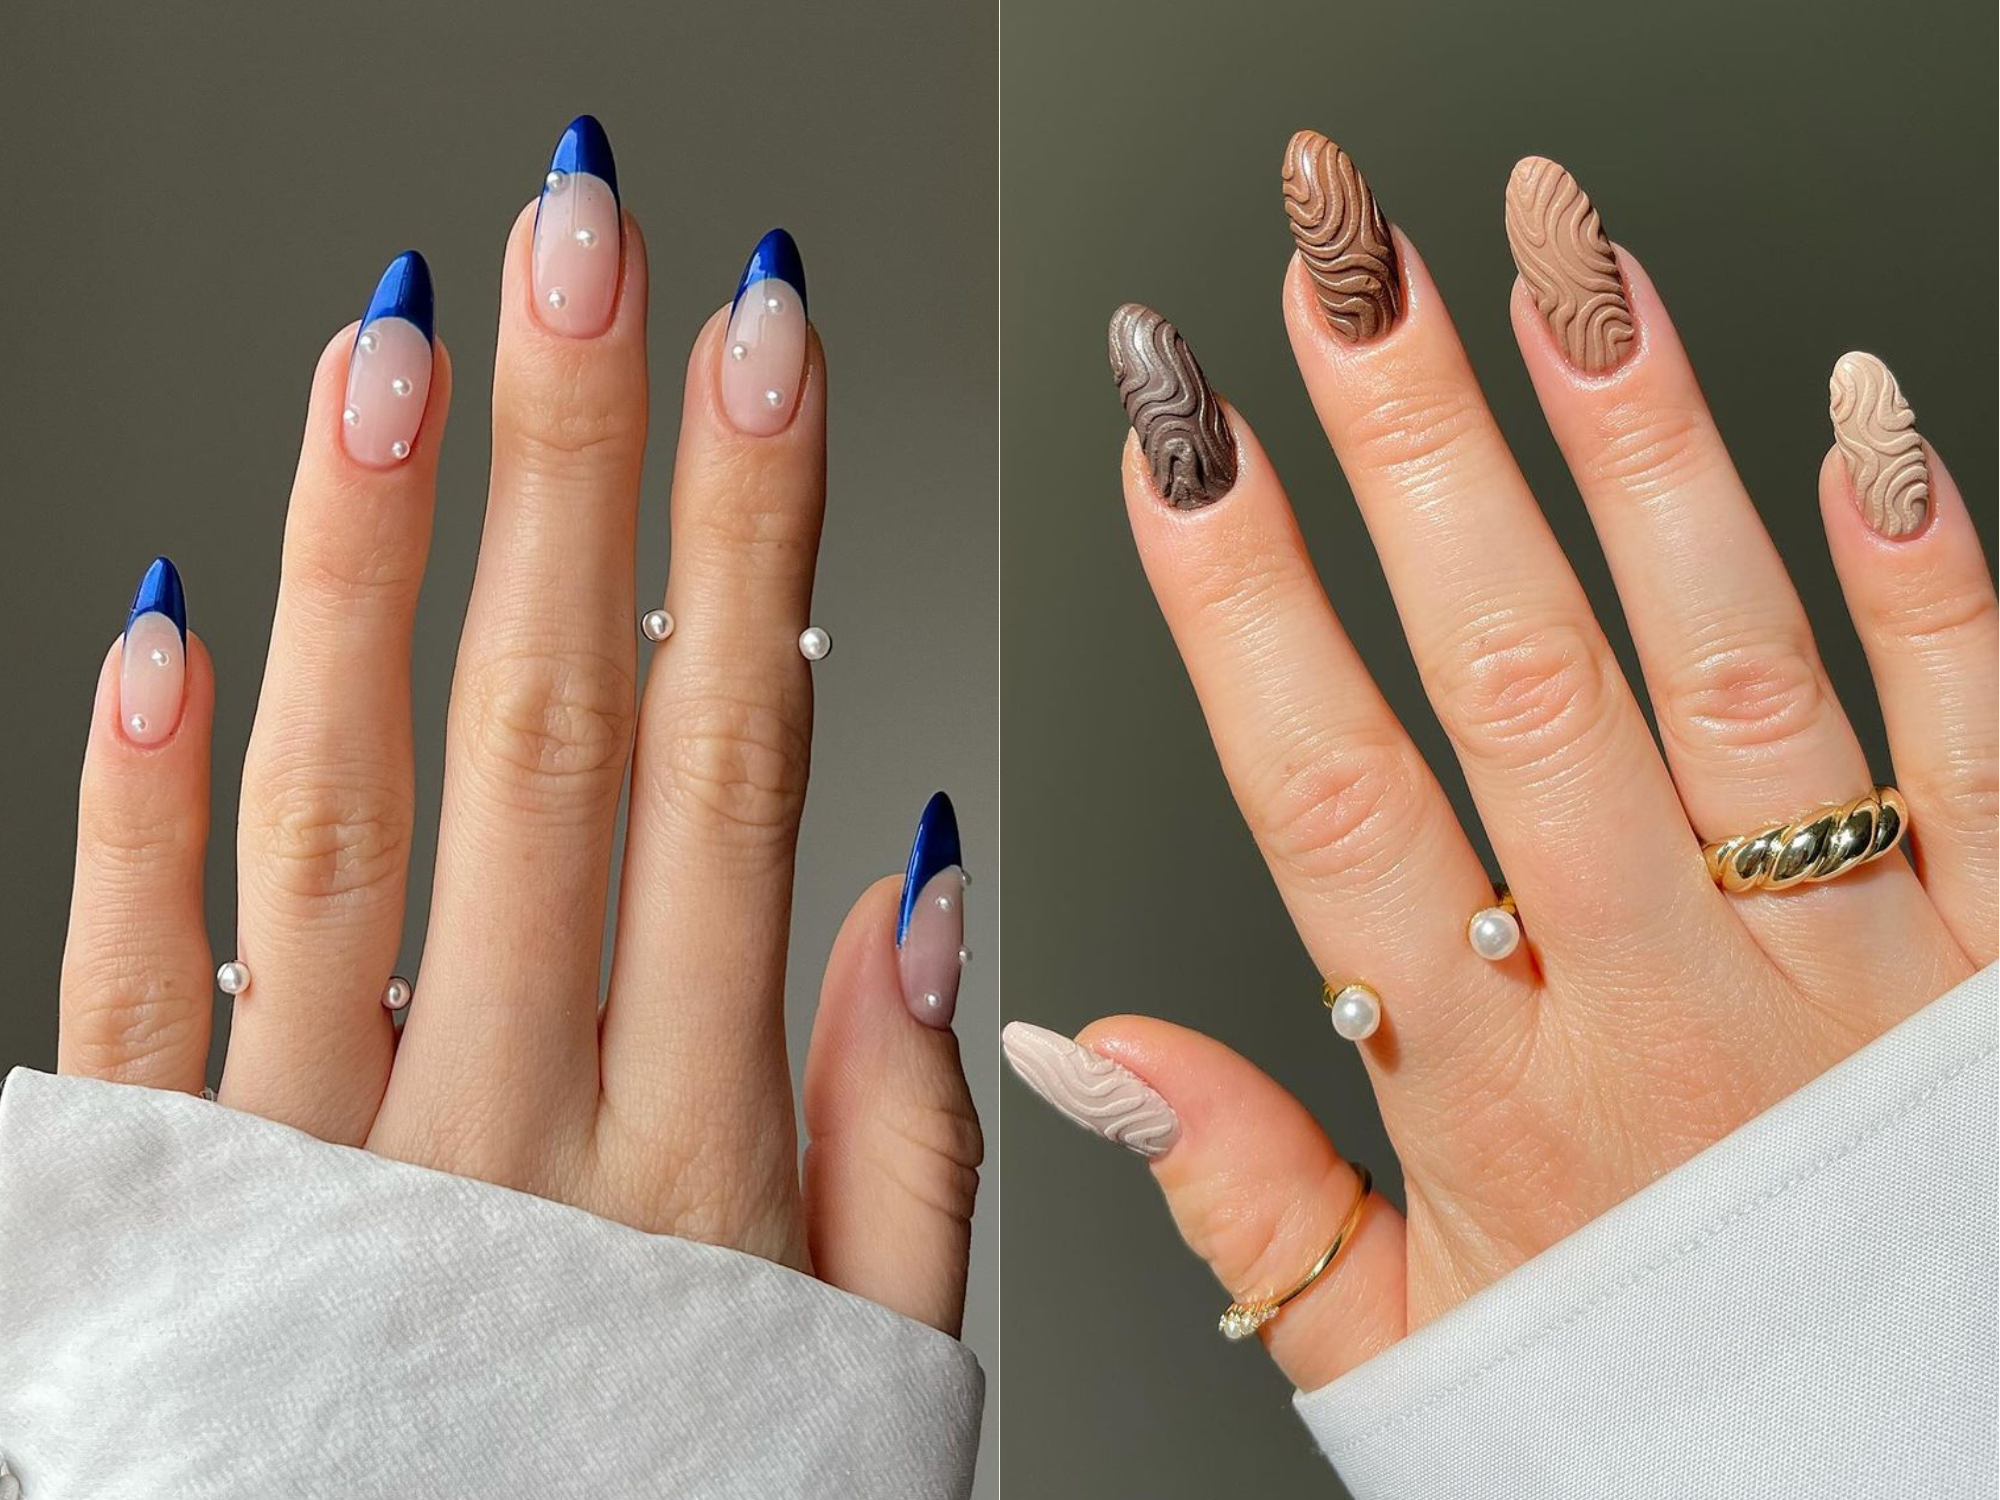 6 Nail Extension Models For Beautiful and Unique Nails